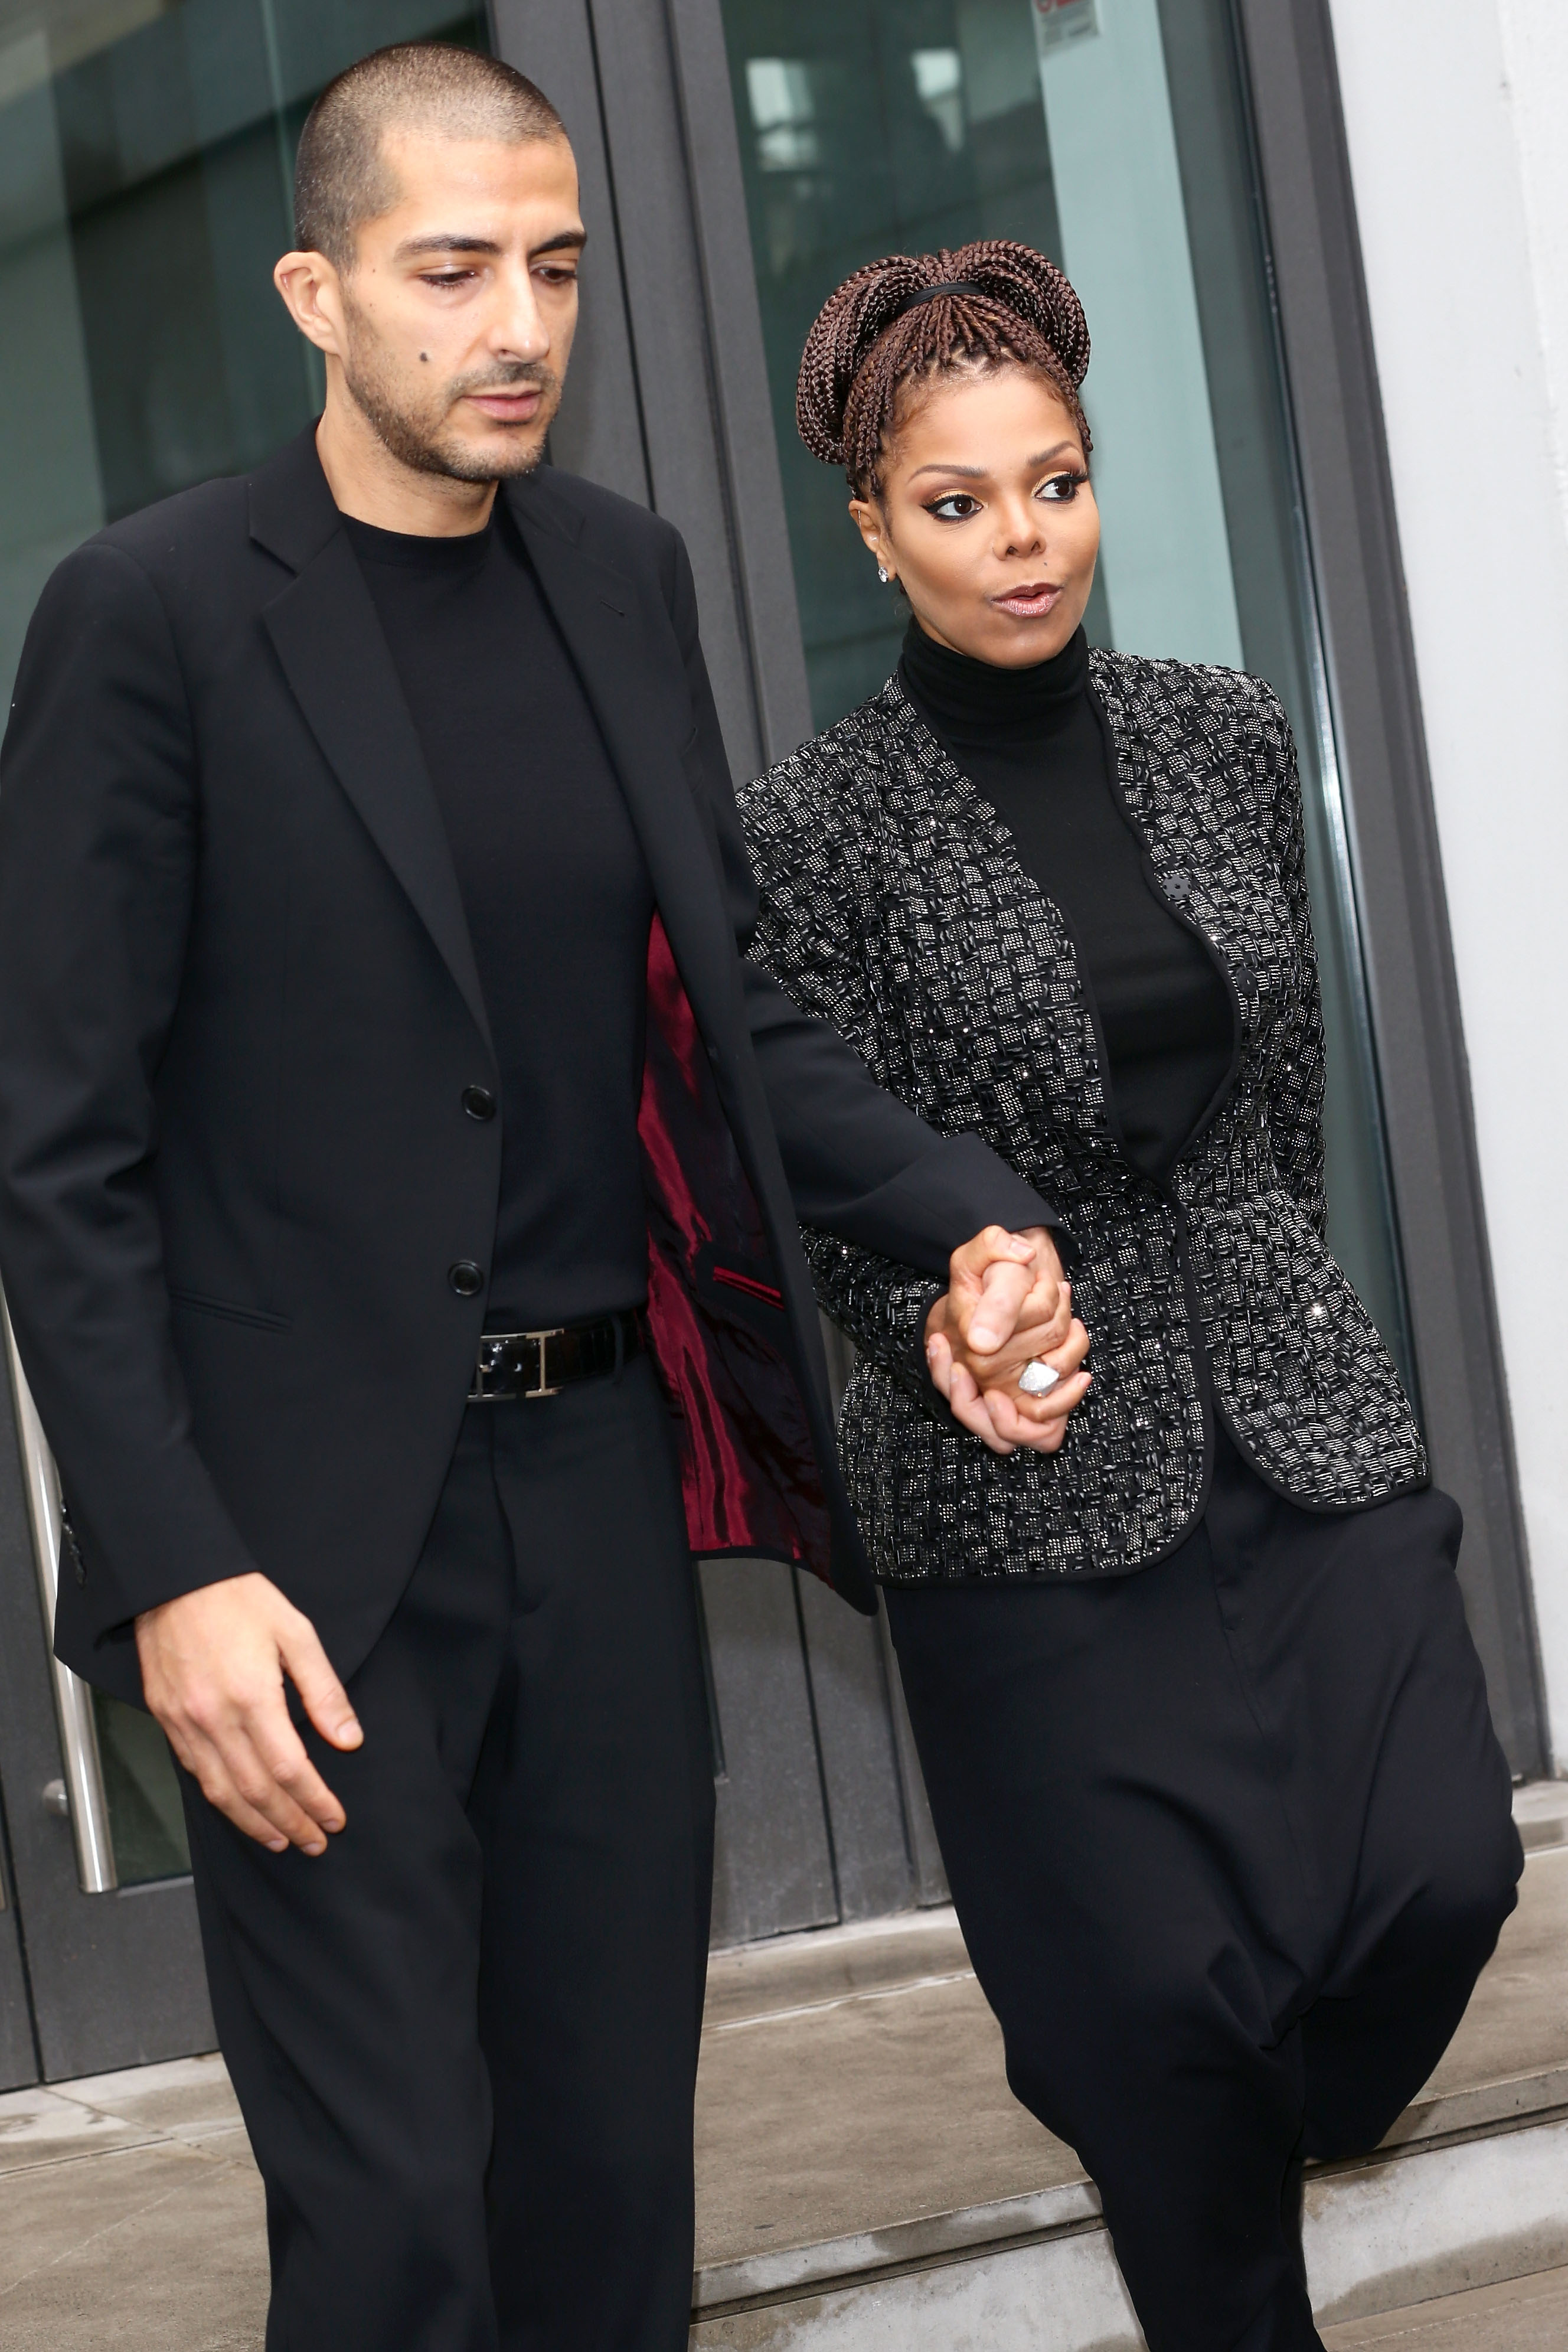 Wissam Al Mana and Janet Jackson attend the Giorgio Armani fashion show on February 25, 2014 in Milan, Italy. | Source: Getty Images